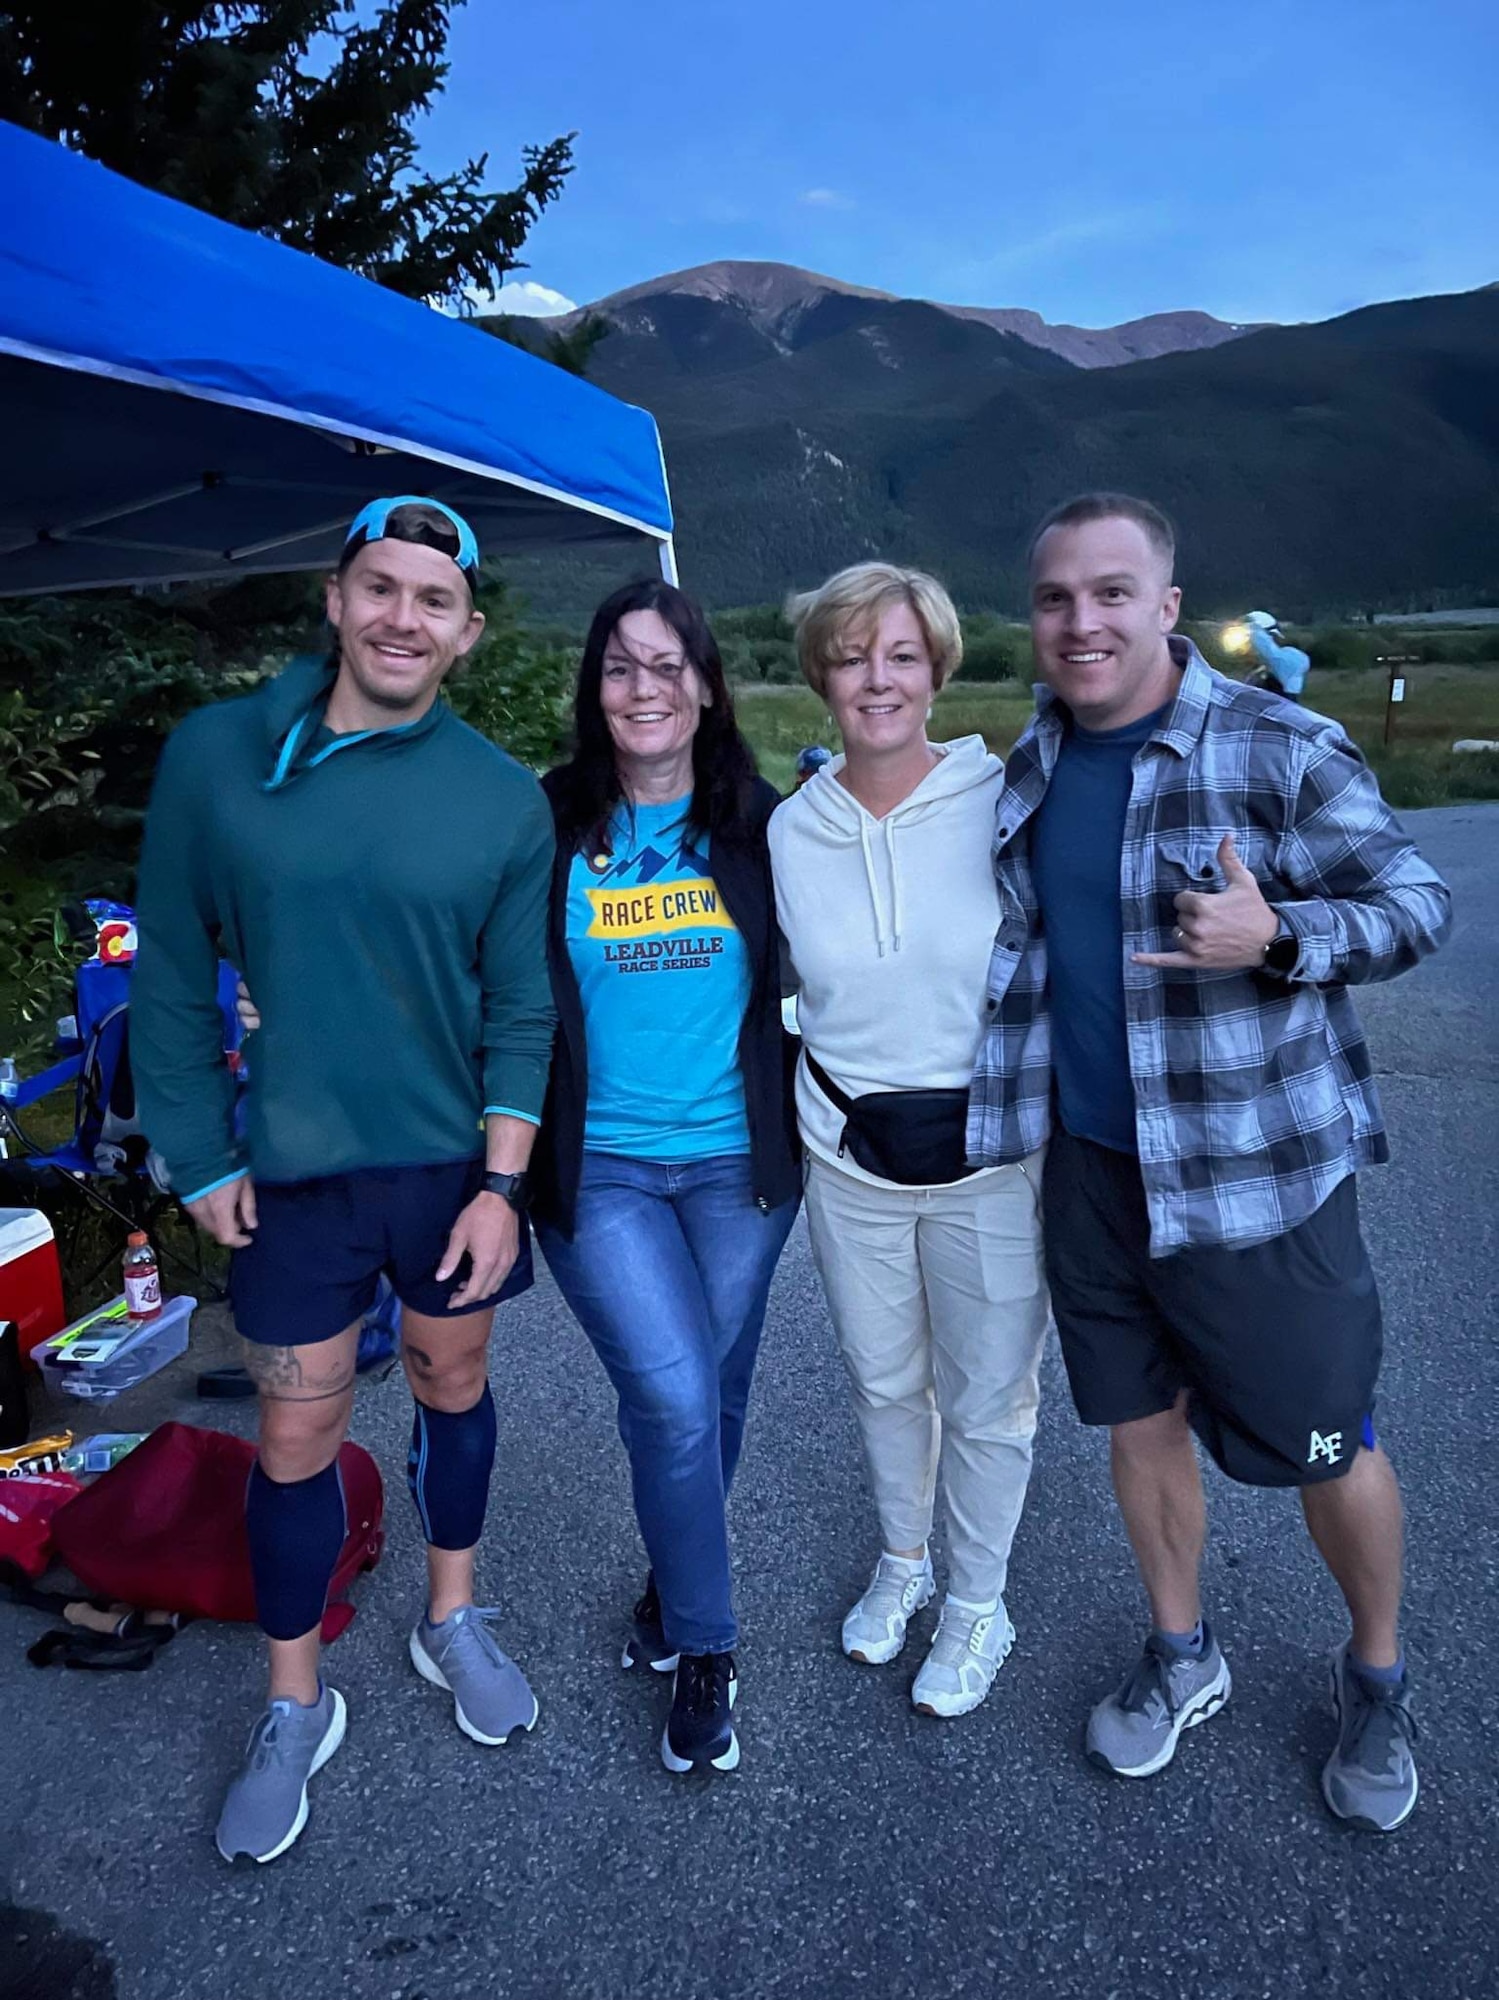 (From left to right) Benjamin Shearer, Christine Buzzard, Kristen Barker, and U.S. Space Force Lt. Col. Christopher McGrath, pose for a group photo during the Leadville Trail 100 Run near Leadville, Colorado, Aug. 19, 2023. Shearer and McGrath served as pacers during different portions of Patrick Buzzard’s, 4th Test and Evaluation Squadron security manager, 100-mile race. The Leadville Trail 100 Run is an ultramarathon held annually on rugged trails and dirt roads through the heart of the Rocky Mountains. The course is a 50-mile out-and-back dogleg run primarily on the Colorado Trail, starting at 10,200 feet. The centerpiece of the course is the climb up to Hope Pass at 12,620 feet, encountered on both the outbound trek and on the return. Buzzard finished the 100-mile course in 29 hours, 48 minutes, and 57 seconds, just beating the 30-hour time limit. (Courtesy photo)